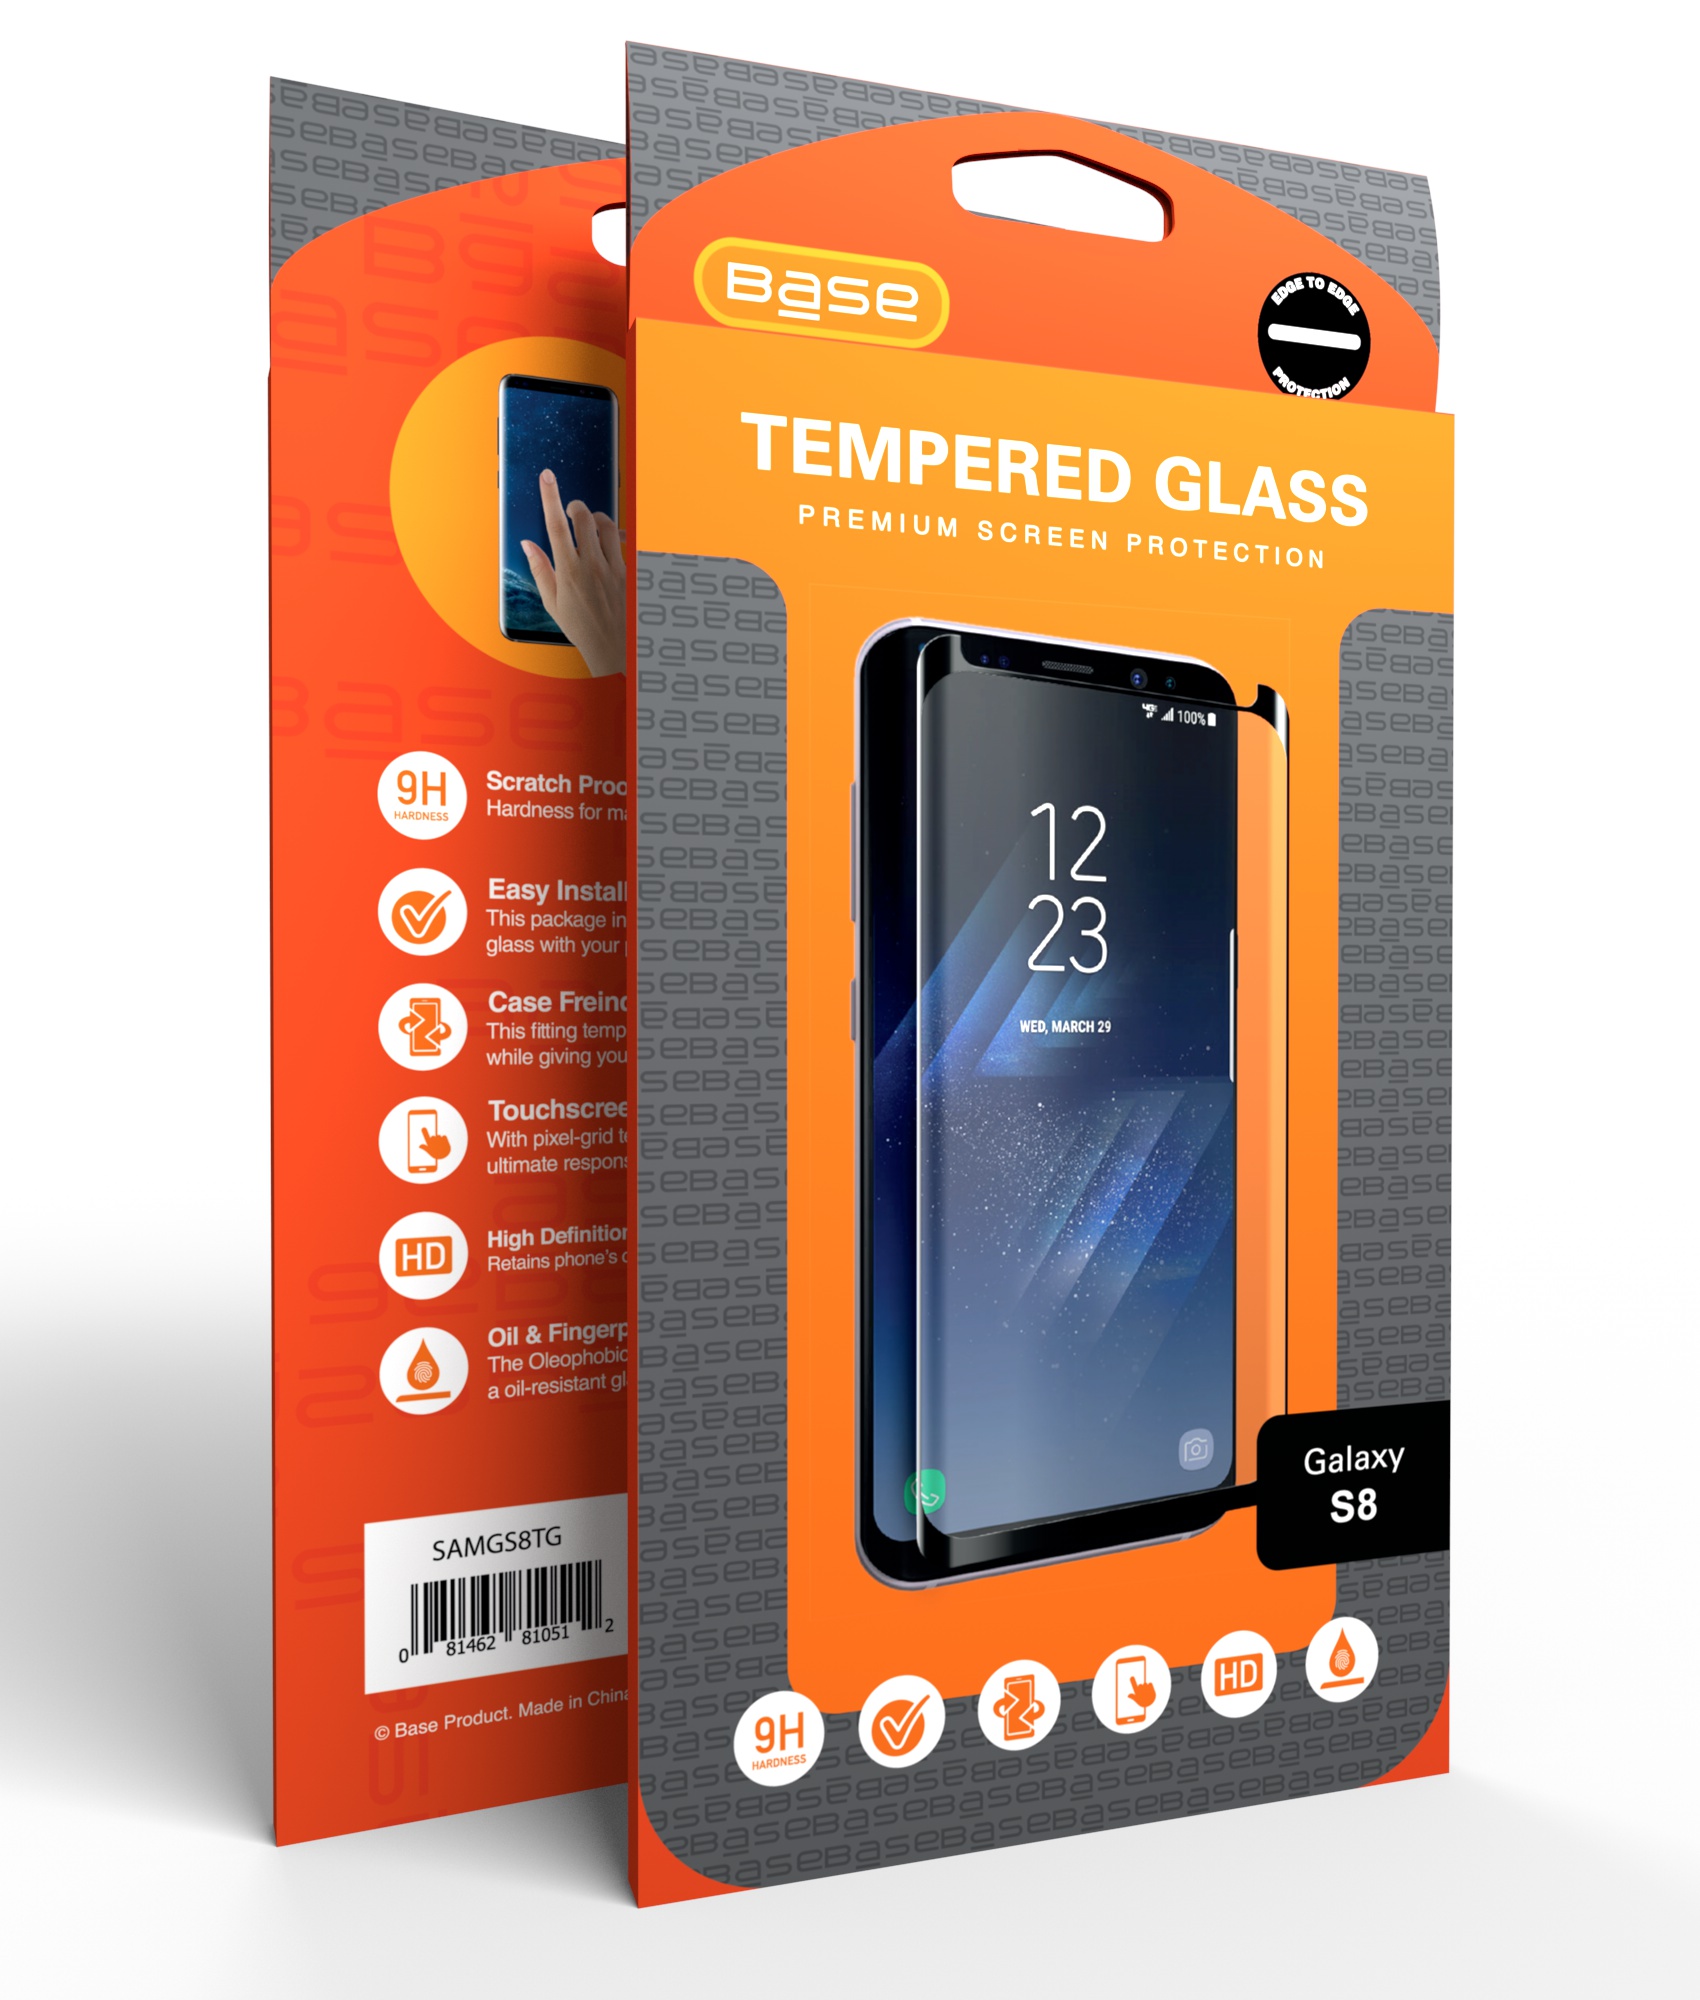 Base Tempered Glass Screen Protector for Galaxy S8